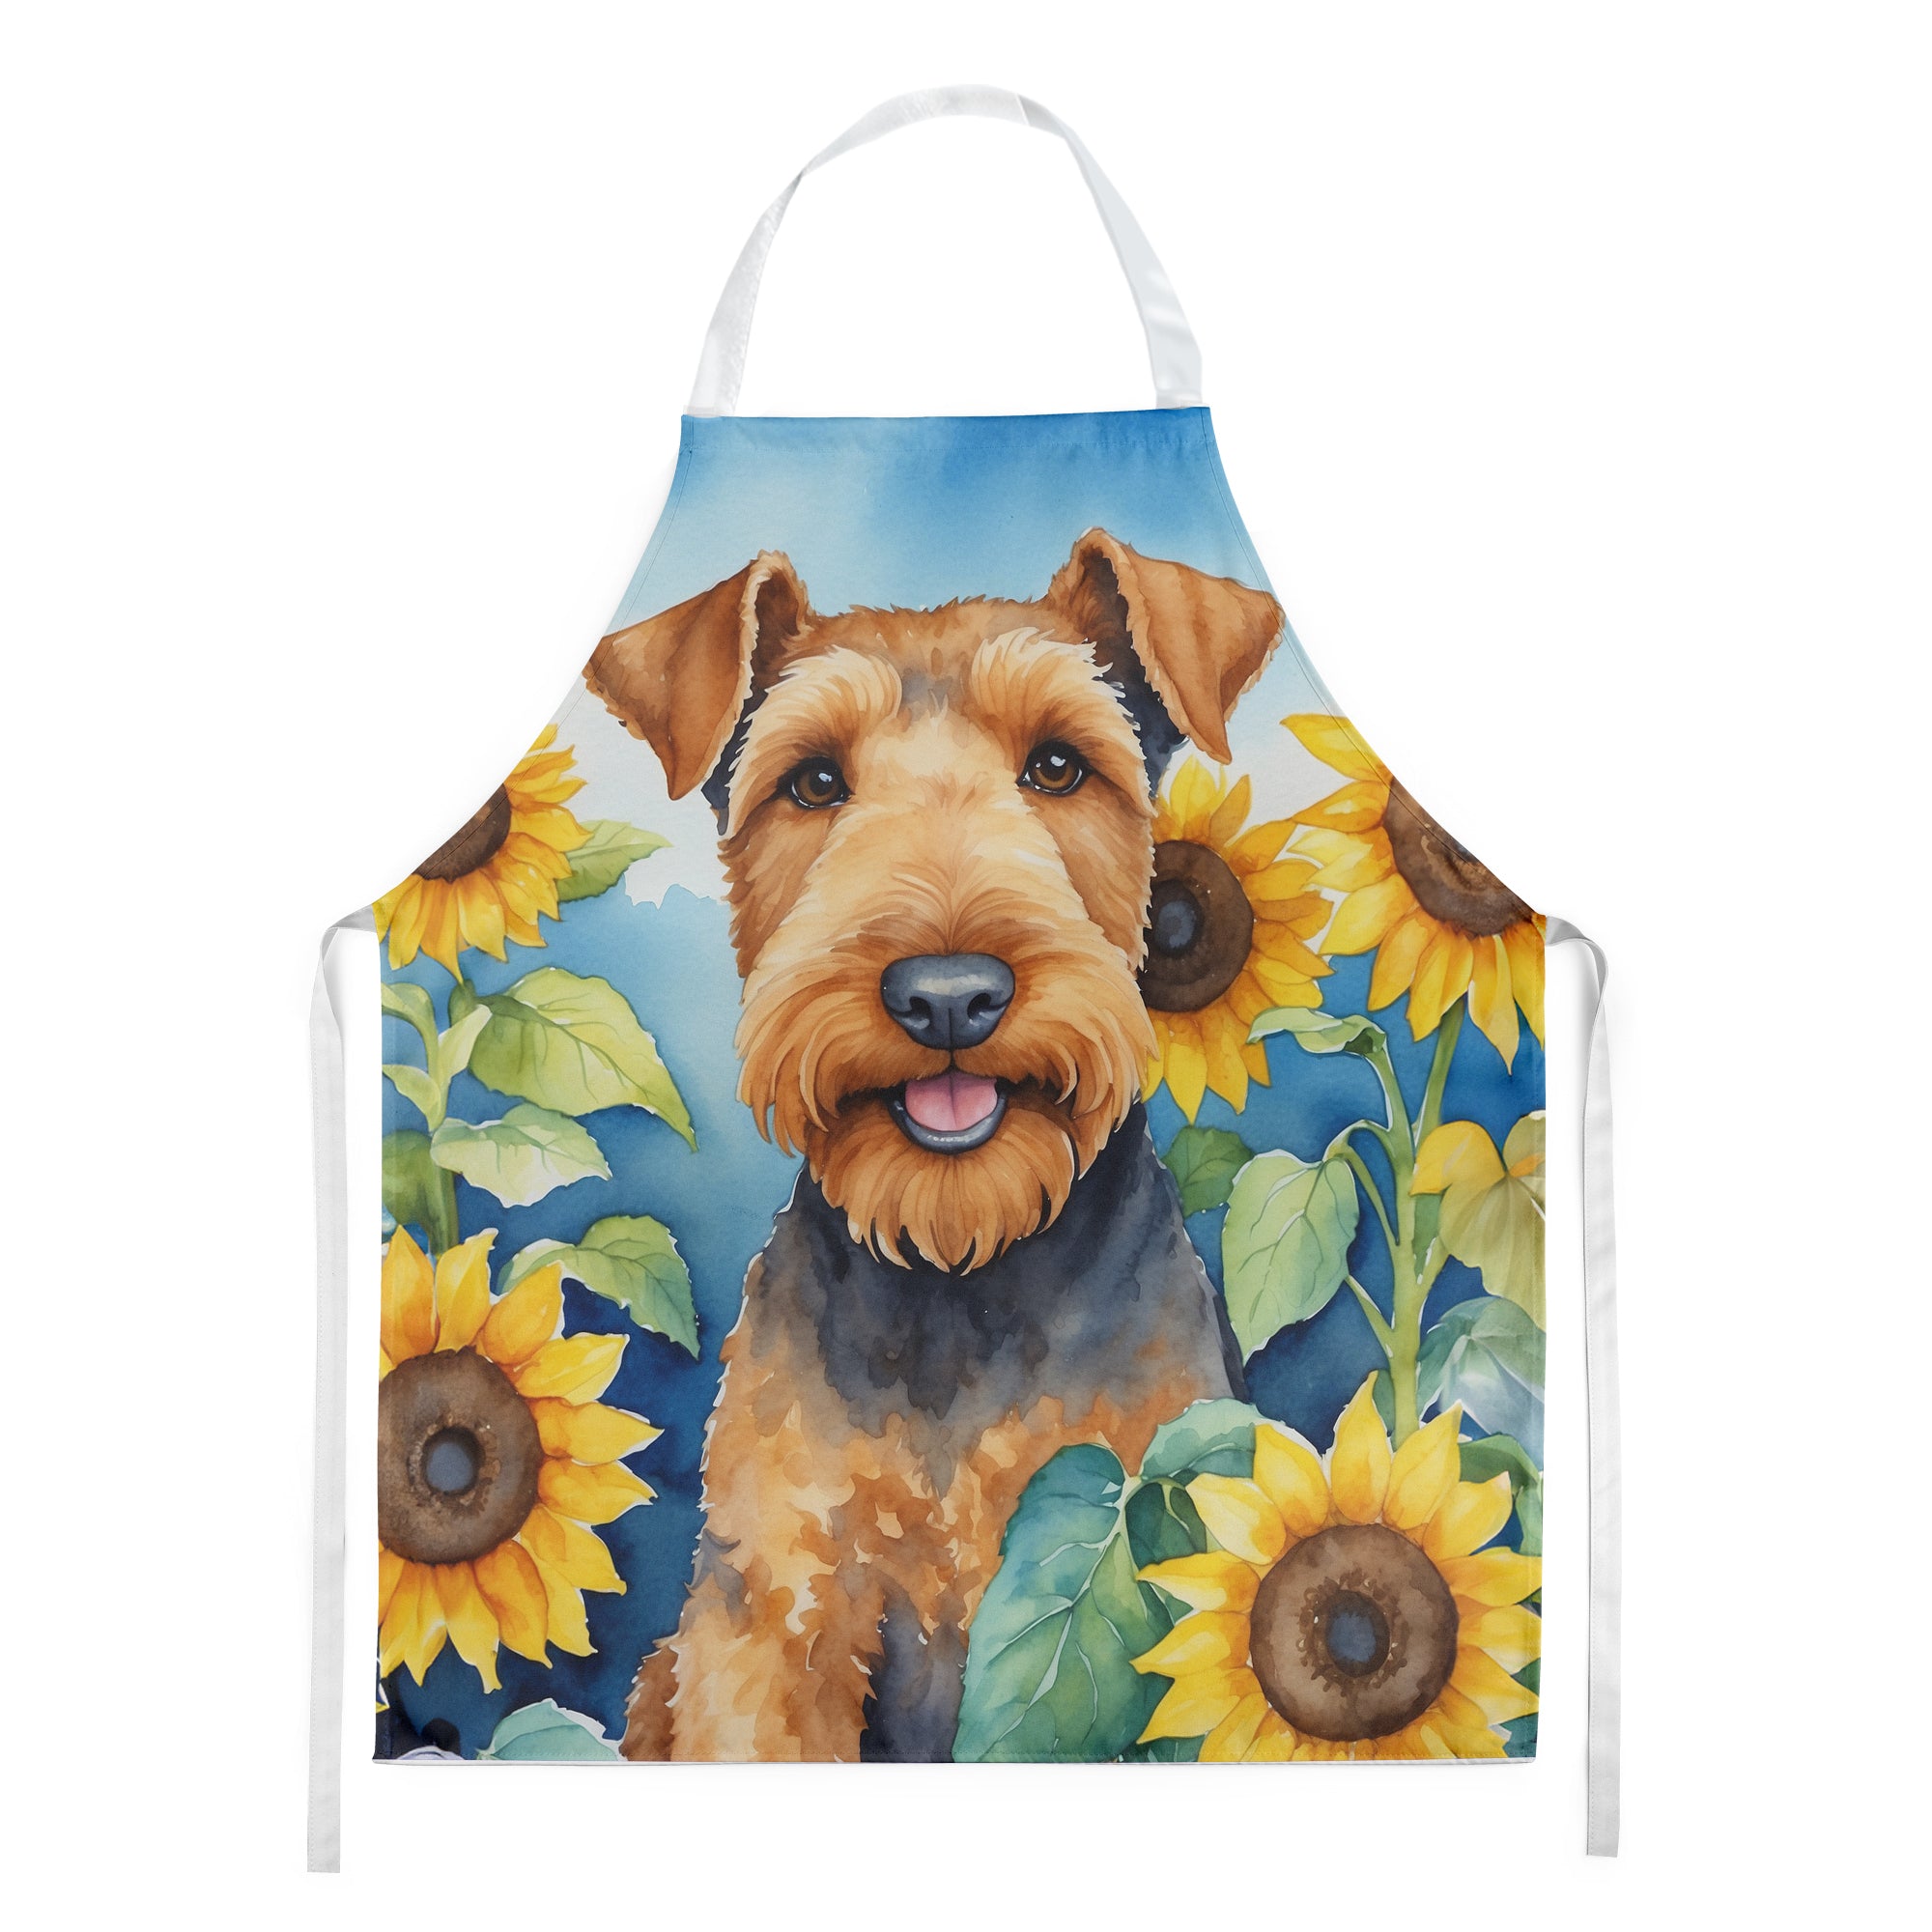 Buy this Airedale Terrier in Sunflowers Apron